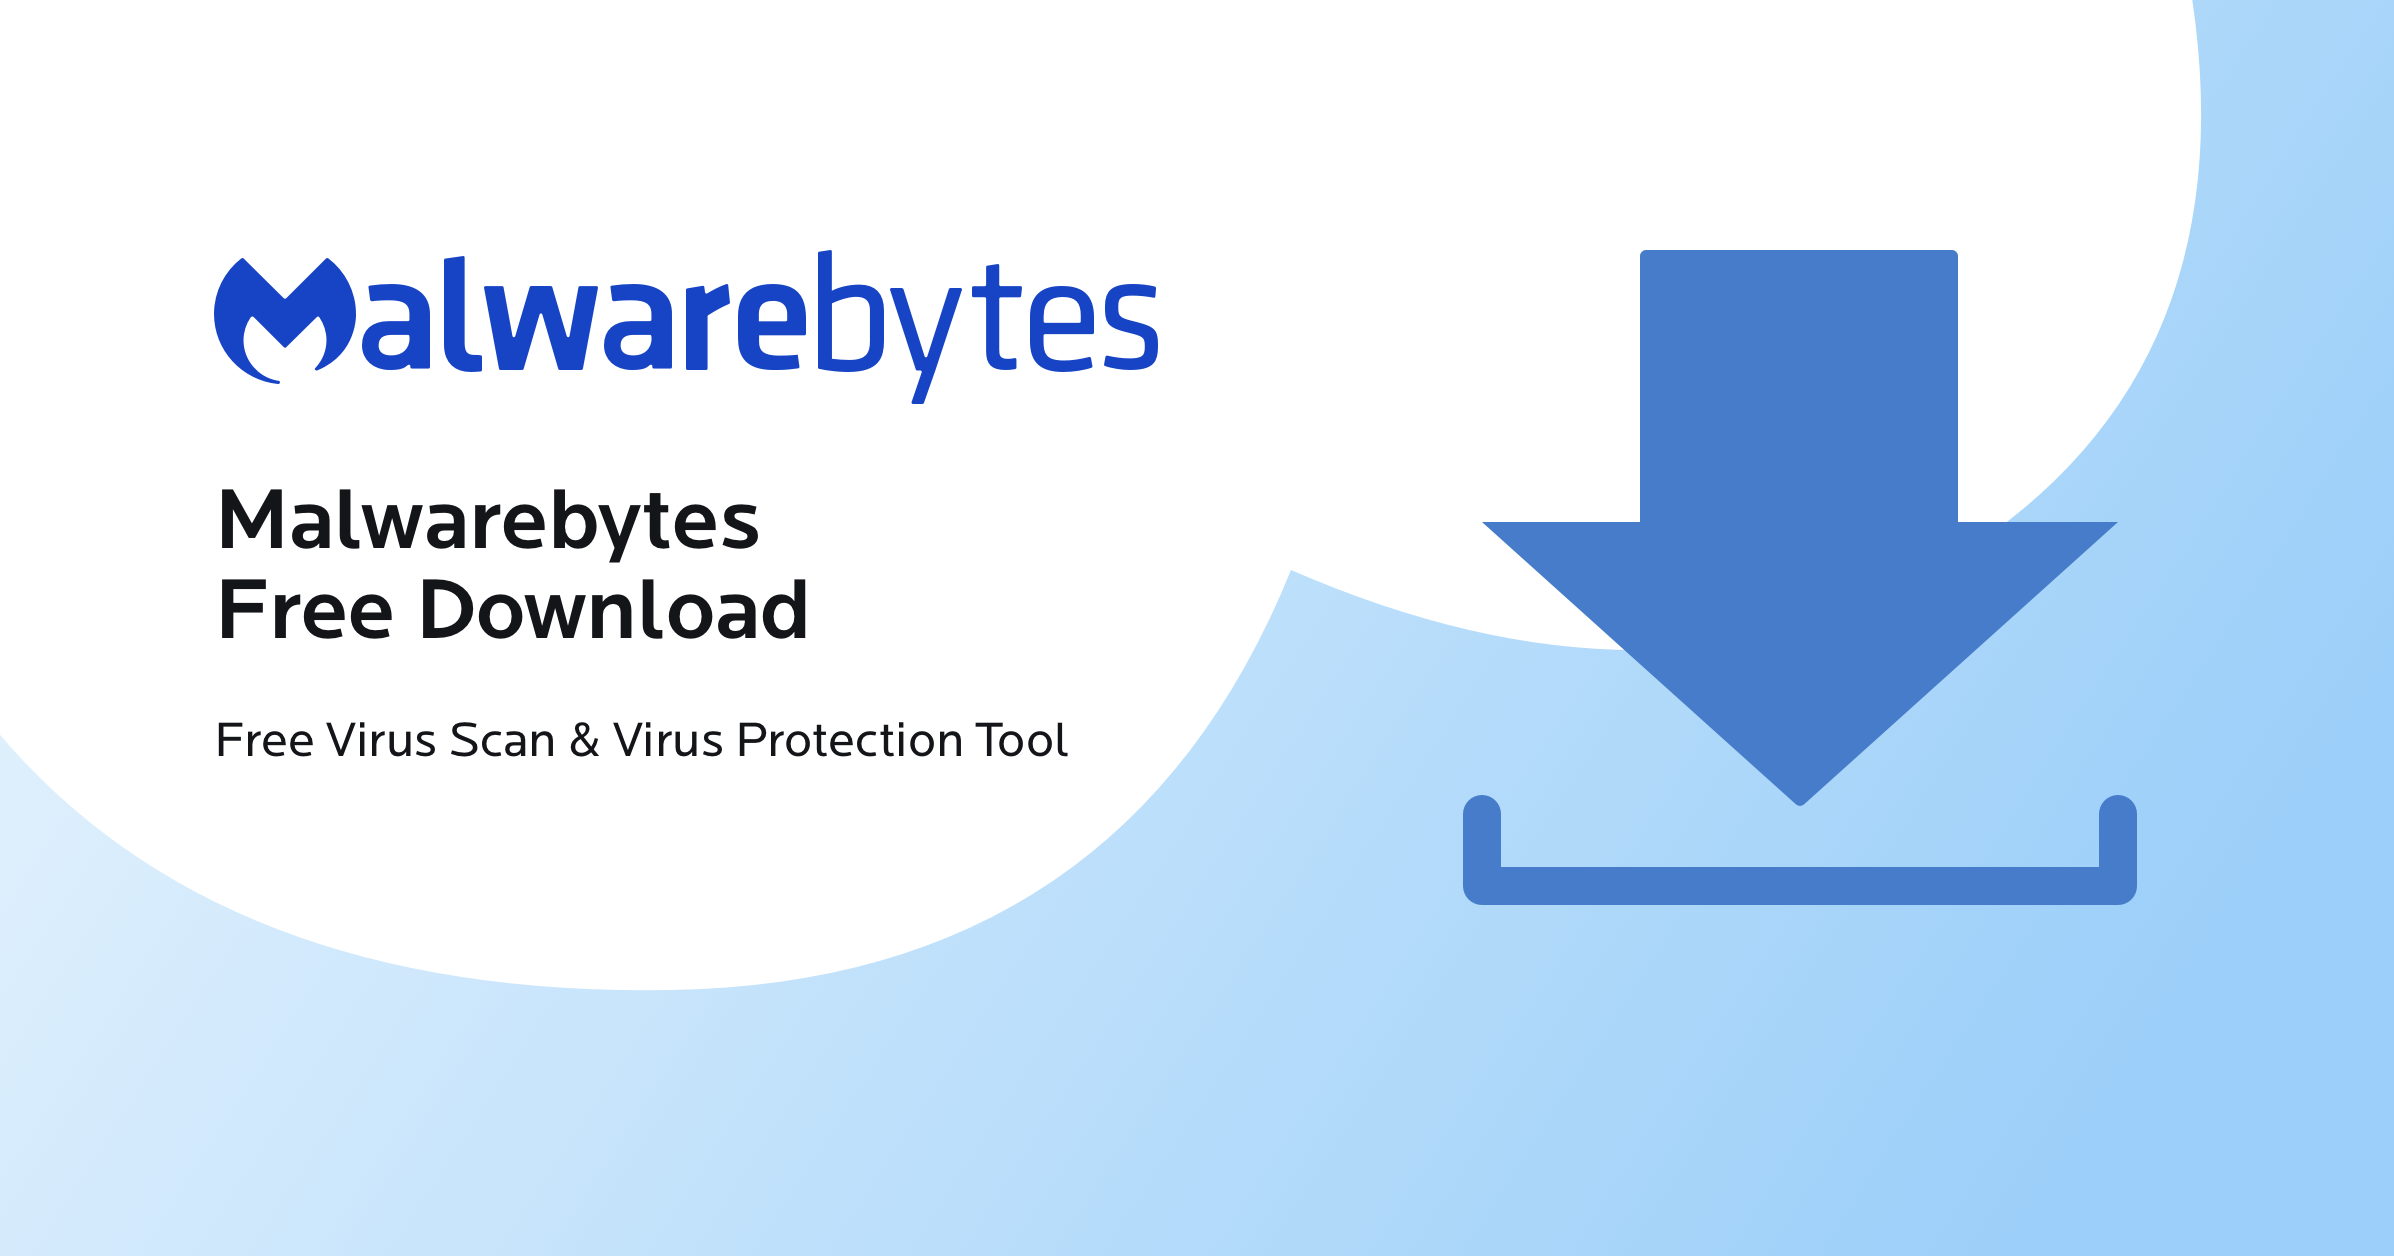 Anti-Malware-Solution Leverage Windows 10 Out of the Box Security